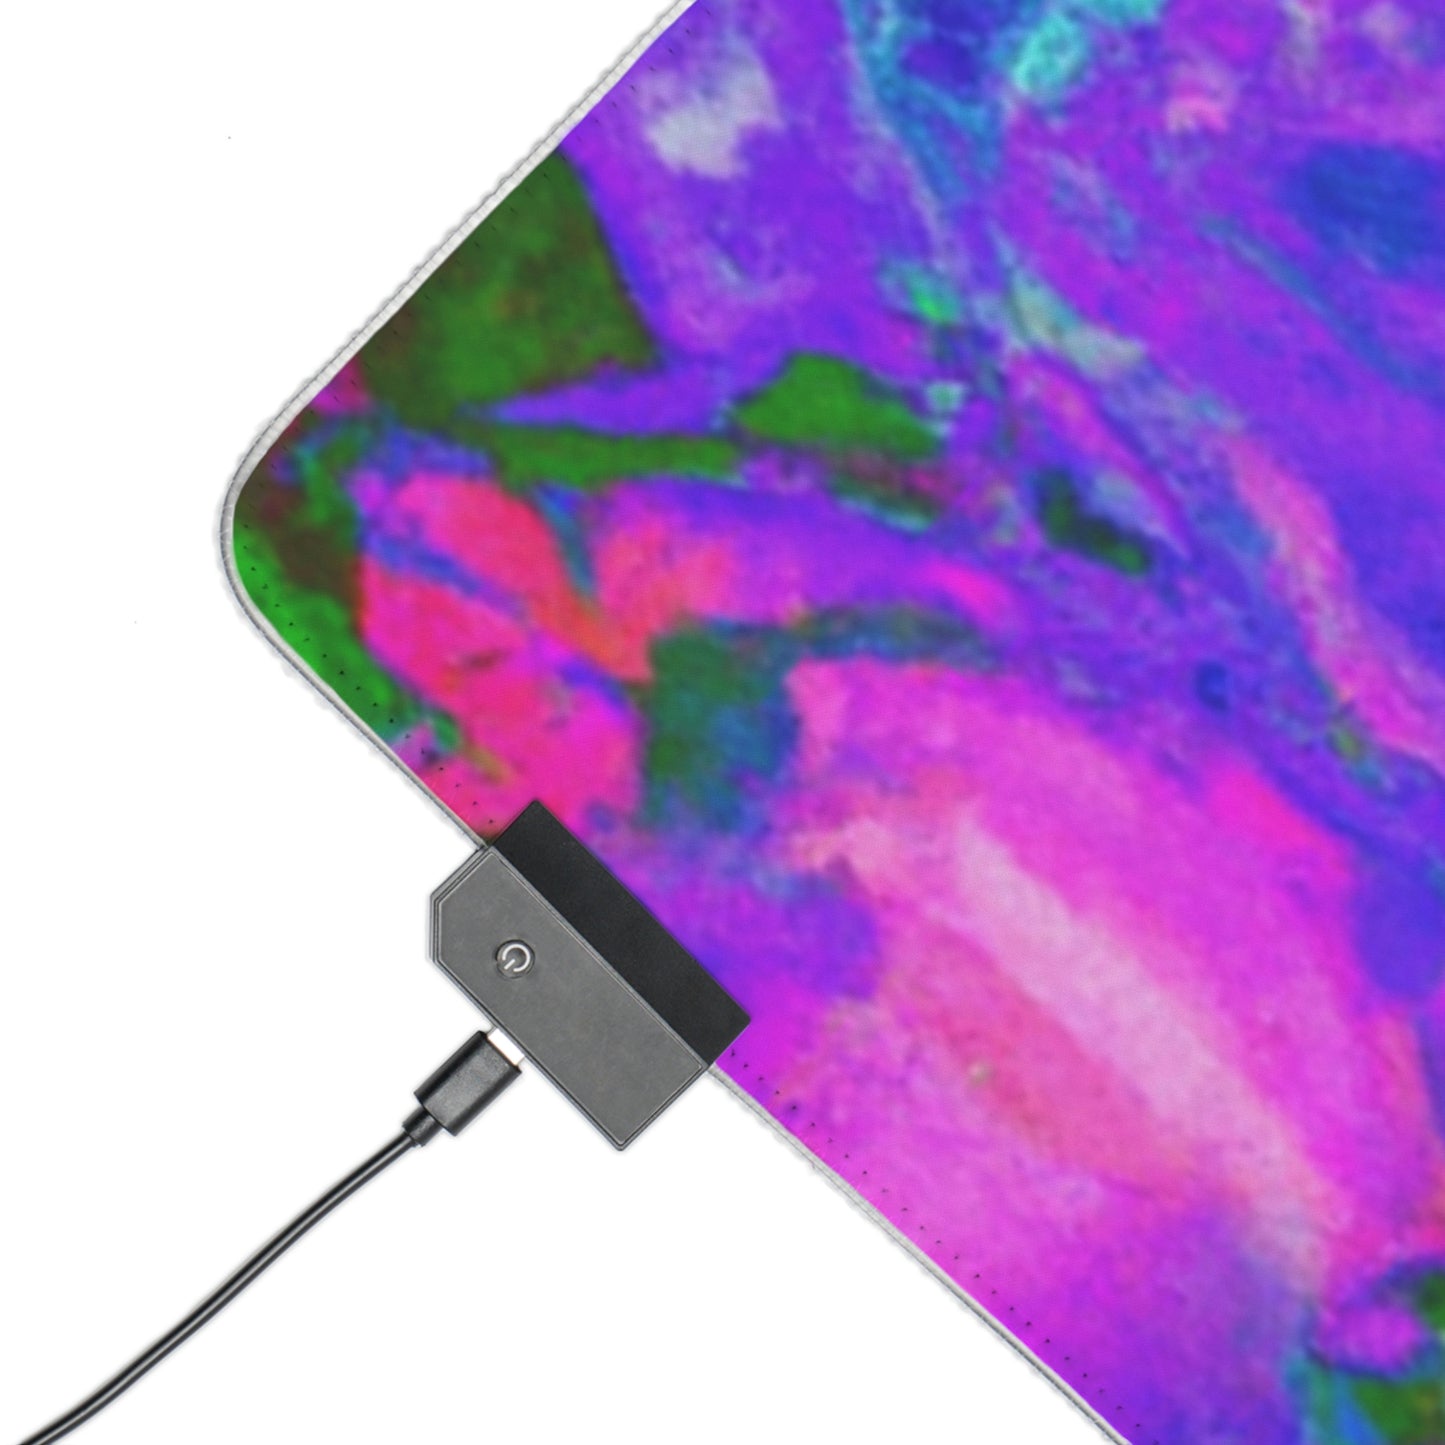 Jedediah Blaster - Psychedelic Trippy LED Light Up Gaming Mouse Pad